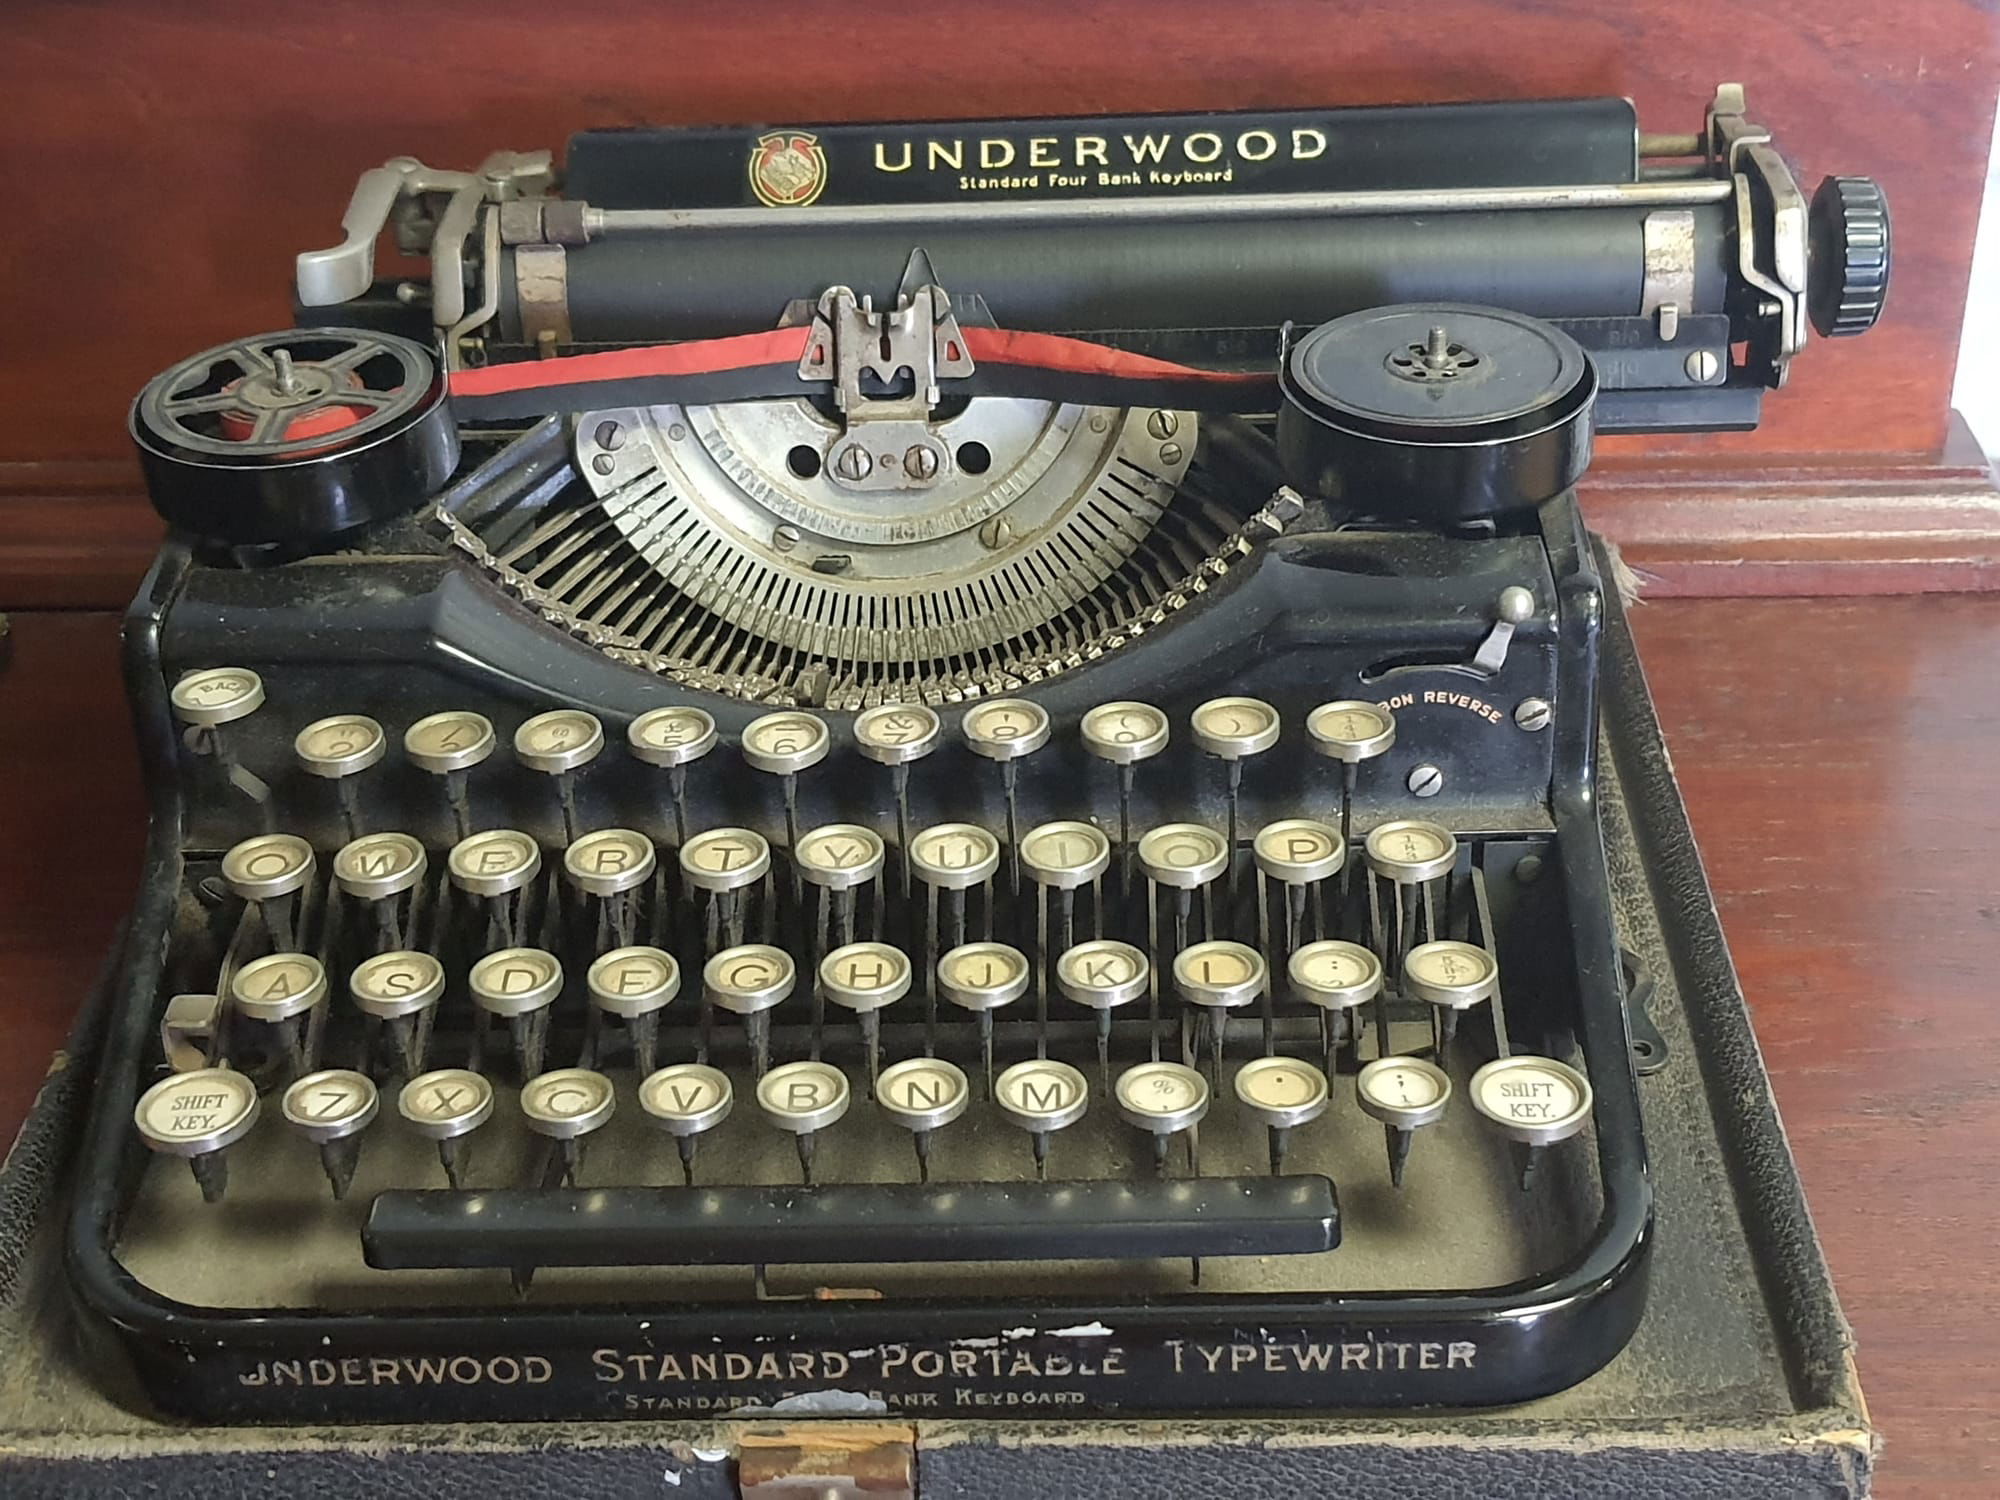 Underwood 1917 travelling version. Equivalent to a notebook today.